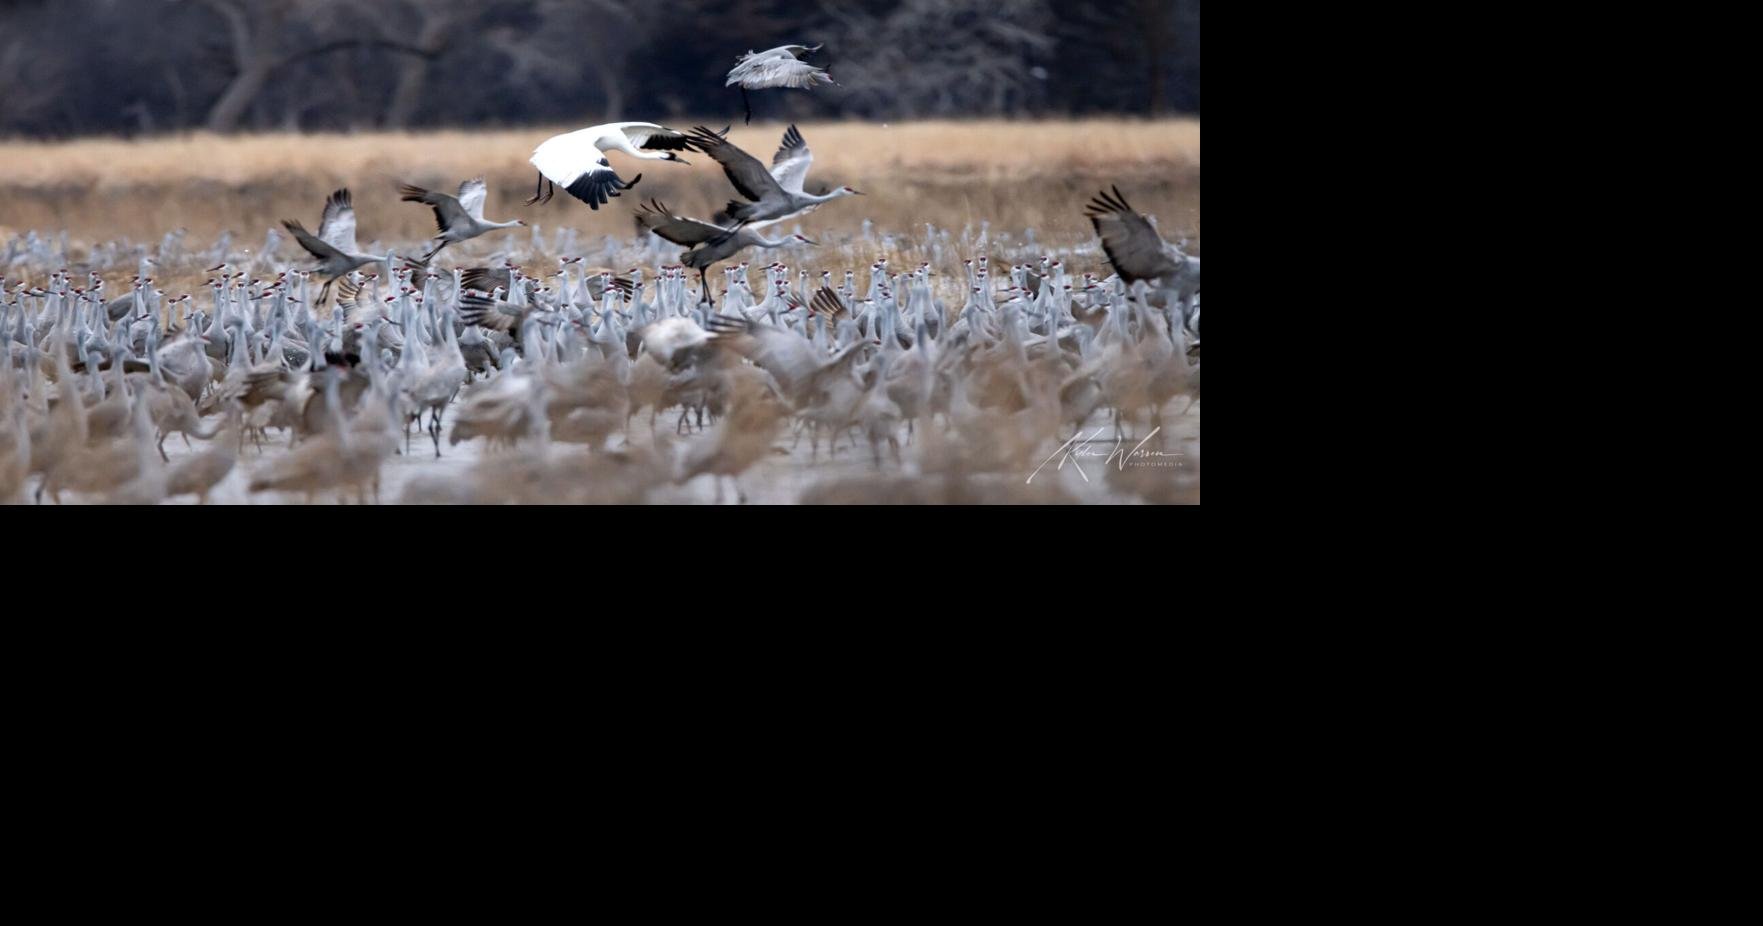 Whooping cranes are joining the migration show in central Nebraska